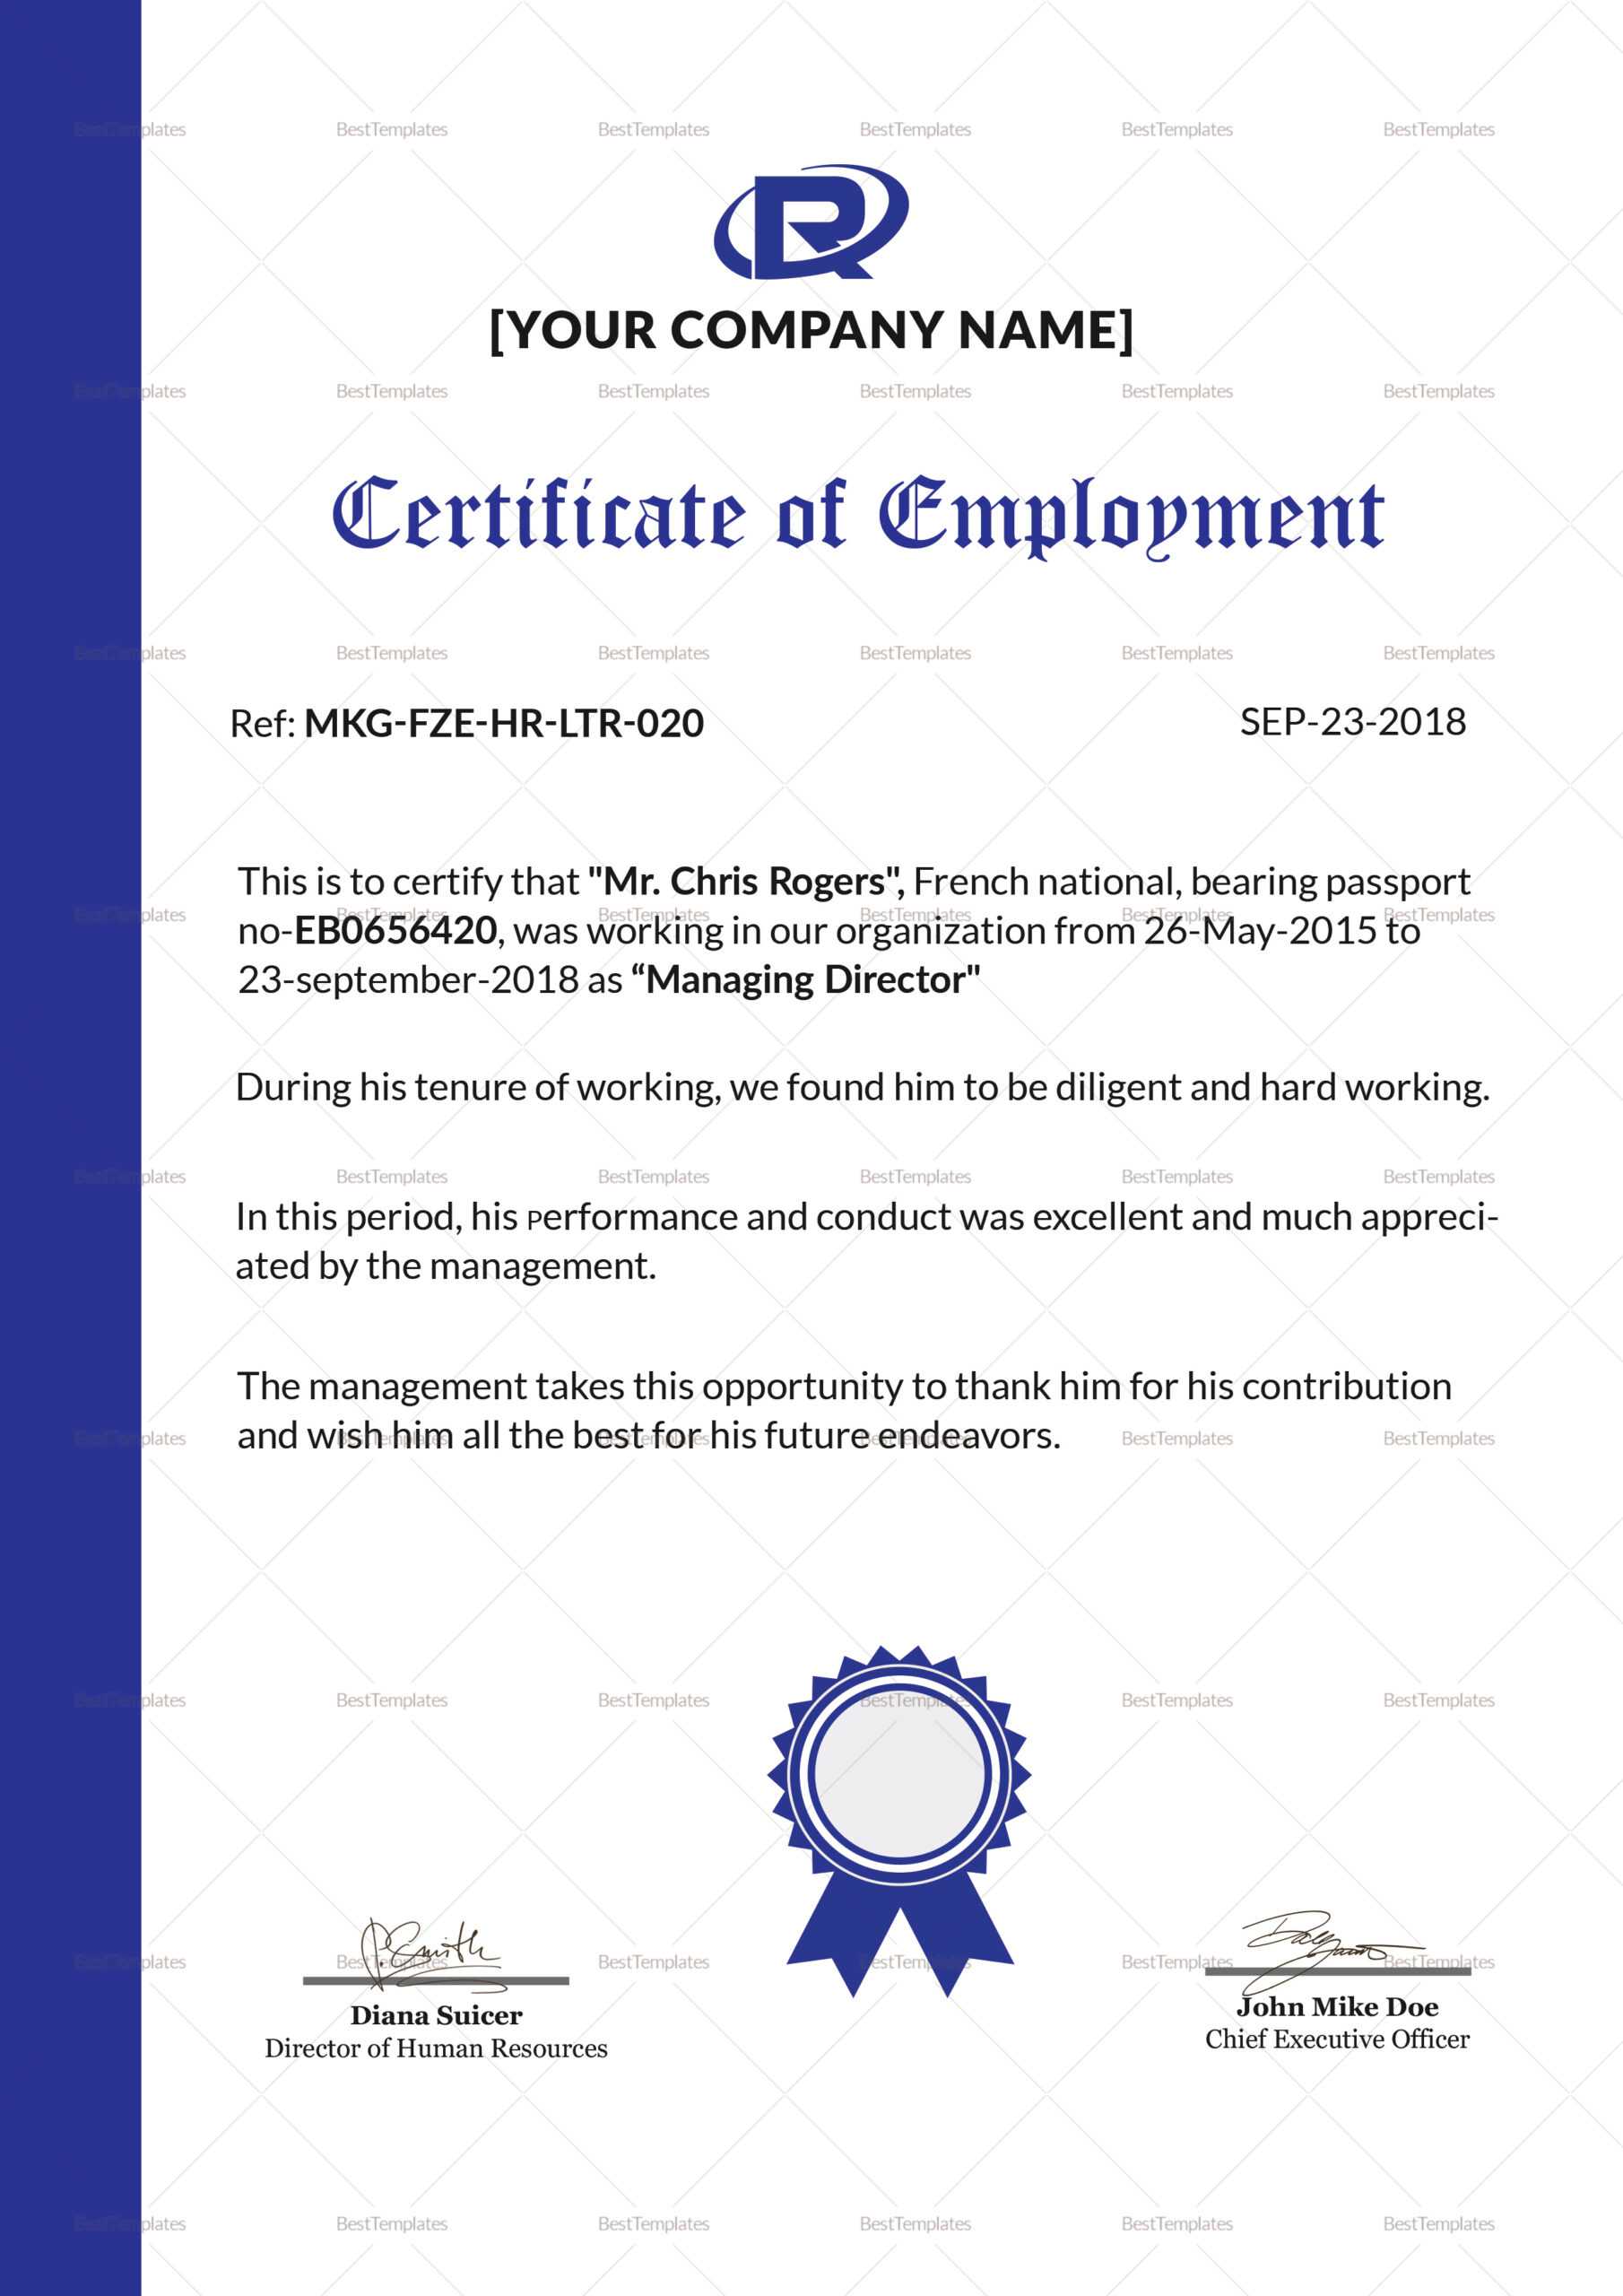 Sample Certificate Of Employment Certification Tugon Med Regarding Template Of Certificate Of Employment